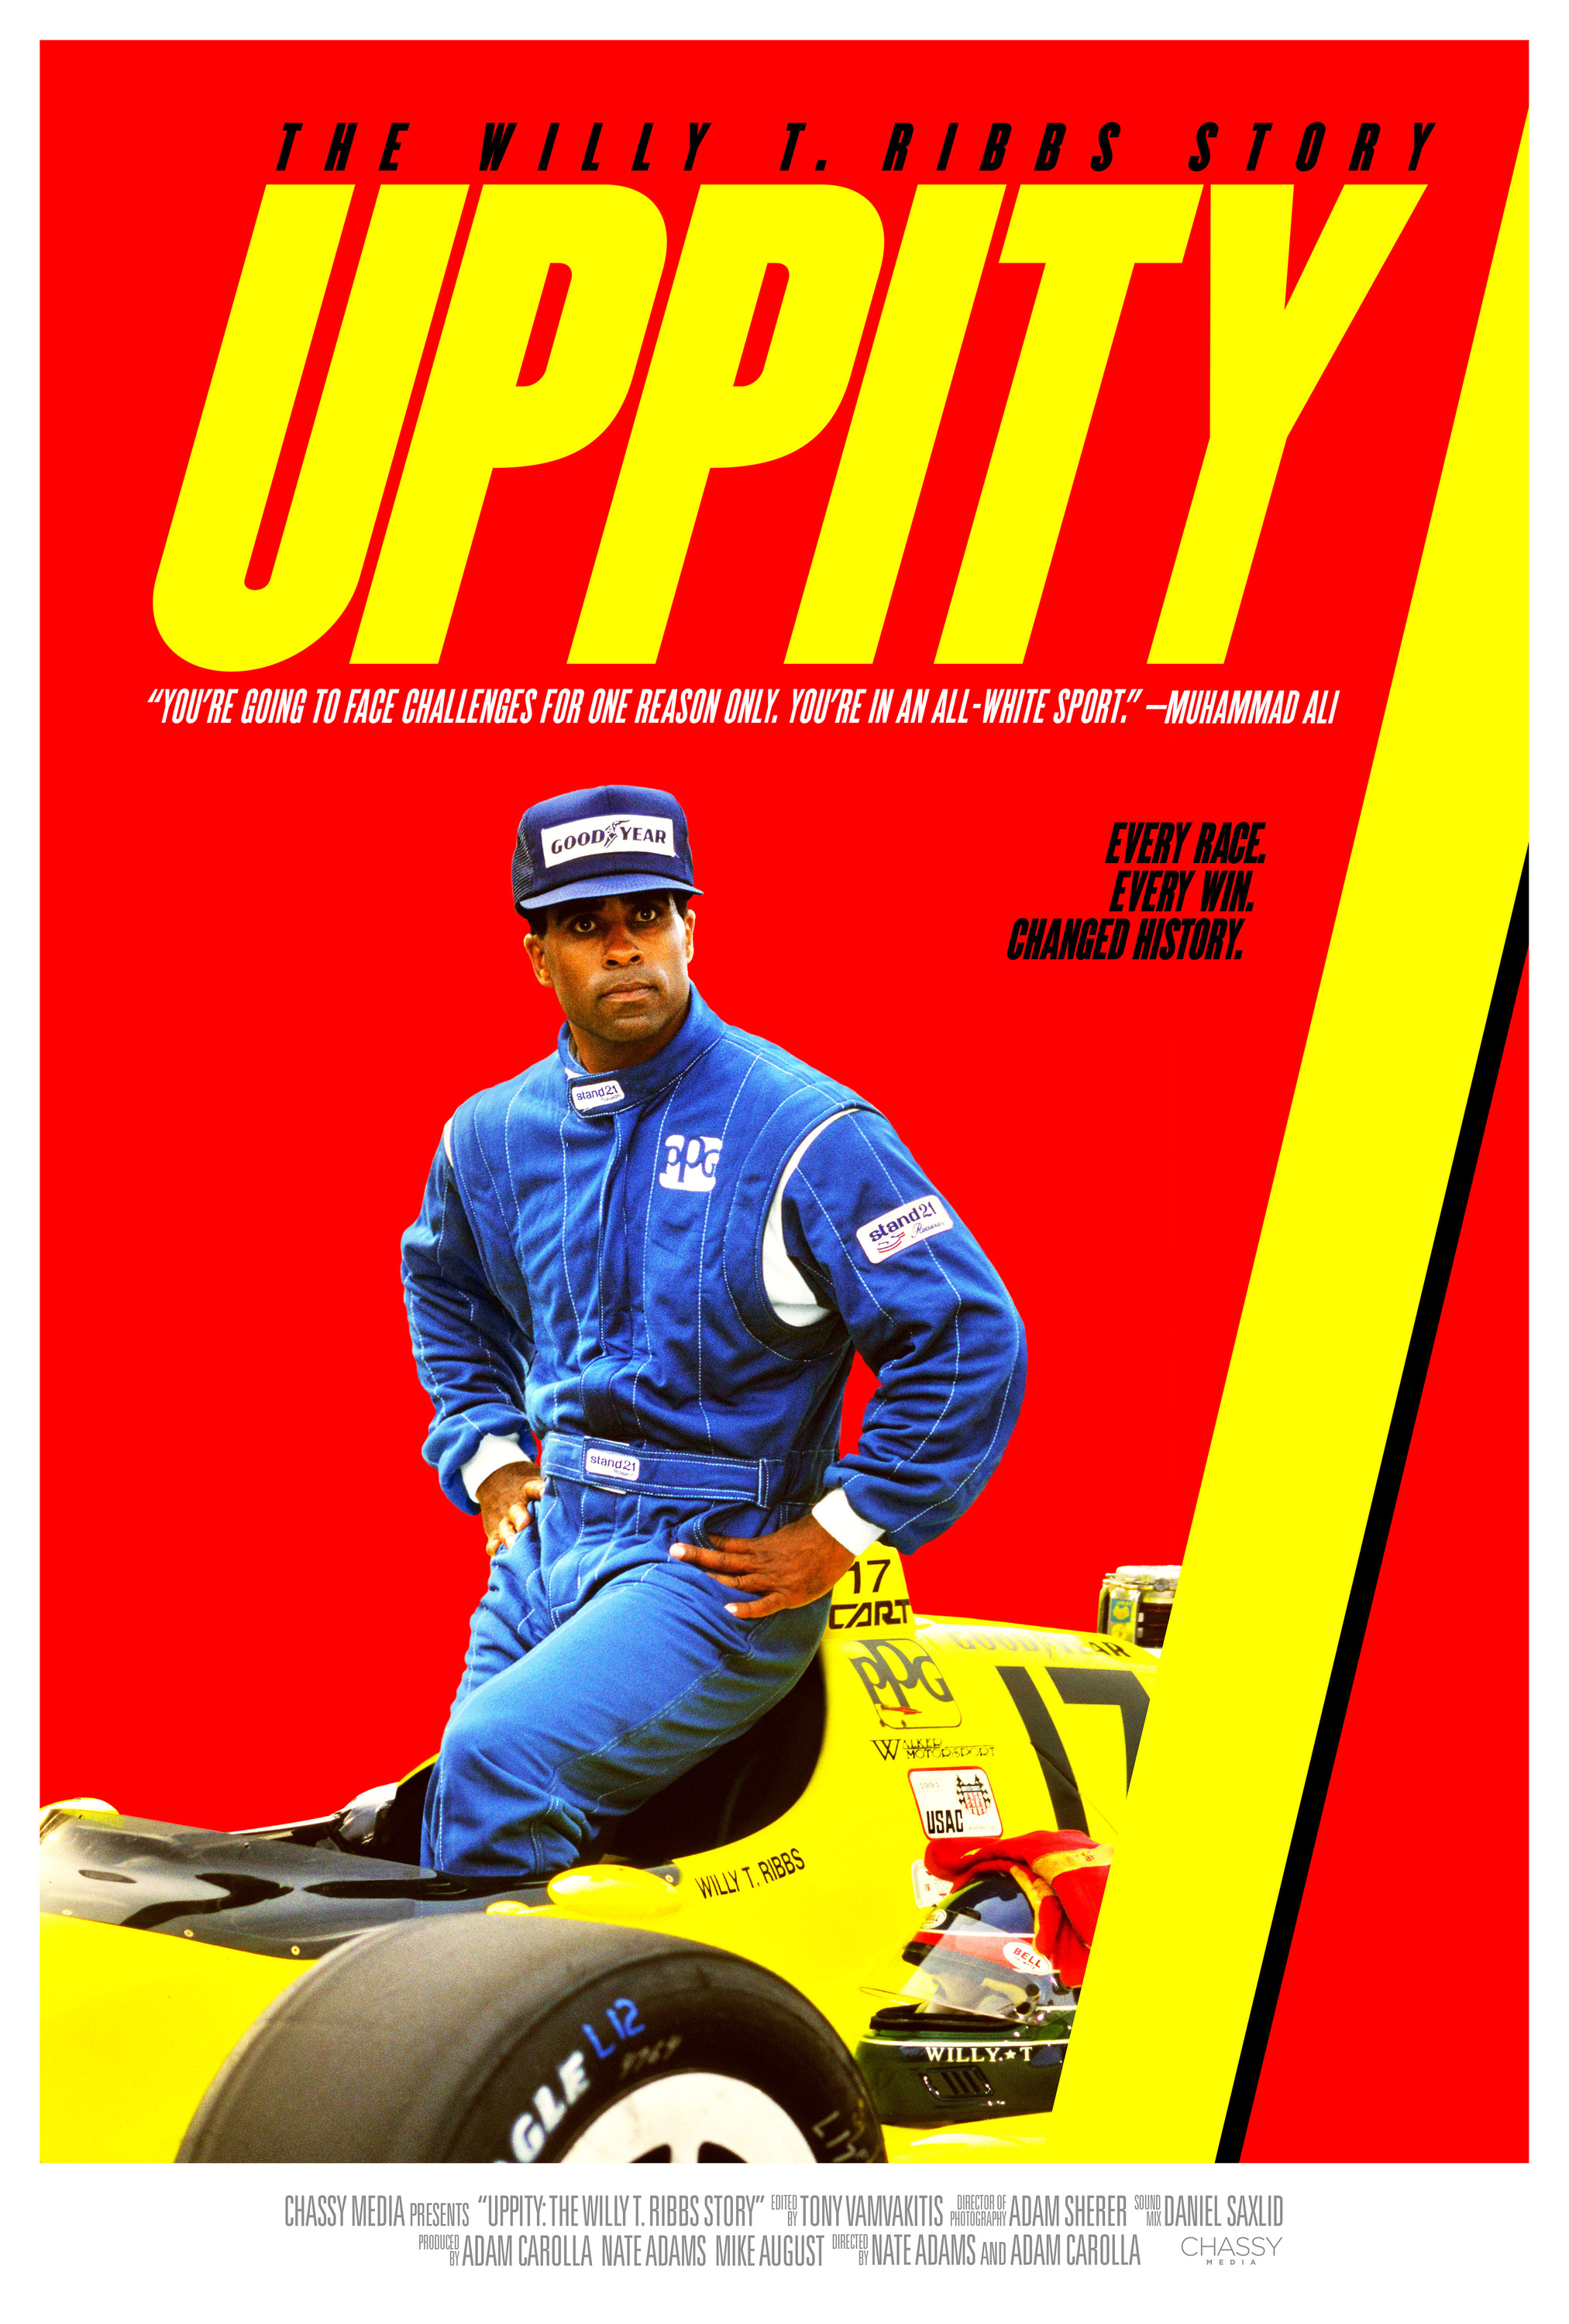 Mega Sized Movie Poster Image for Uppity: The Willy T. Ribbs Story 